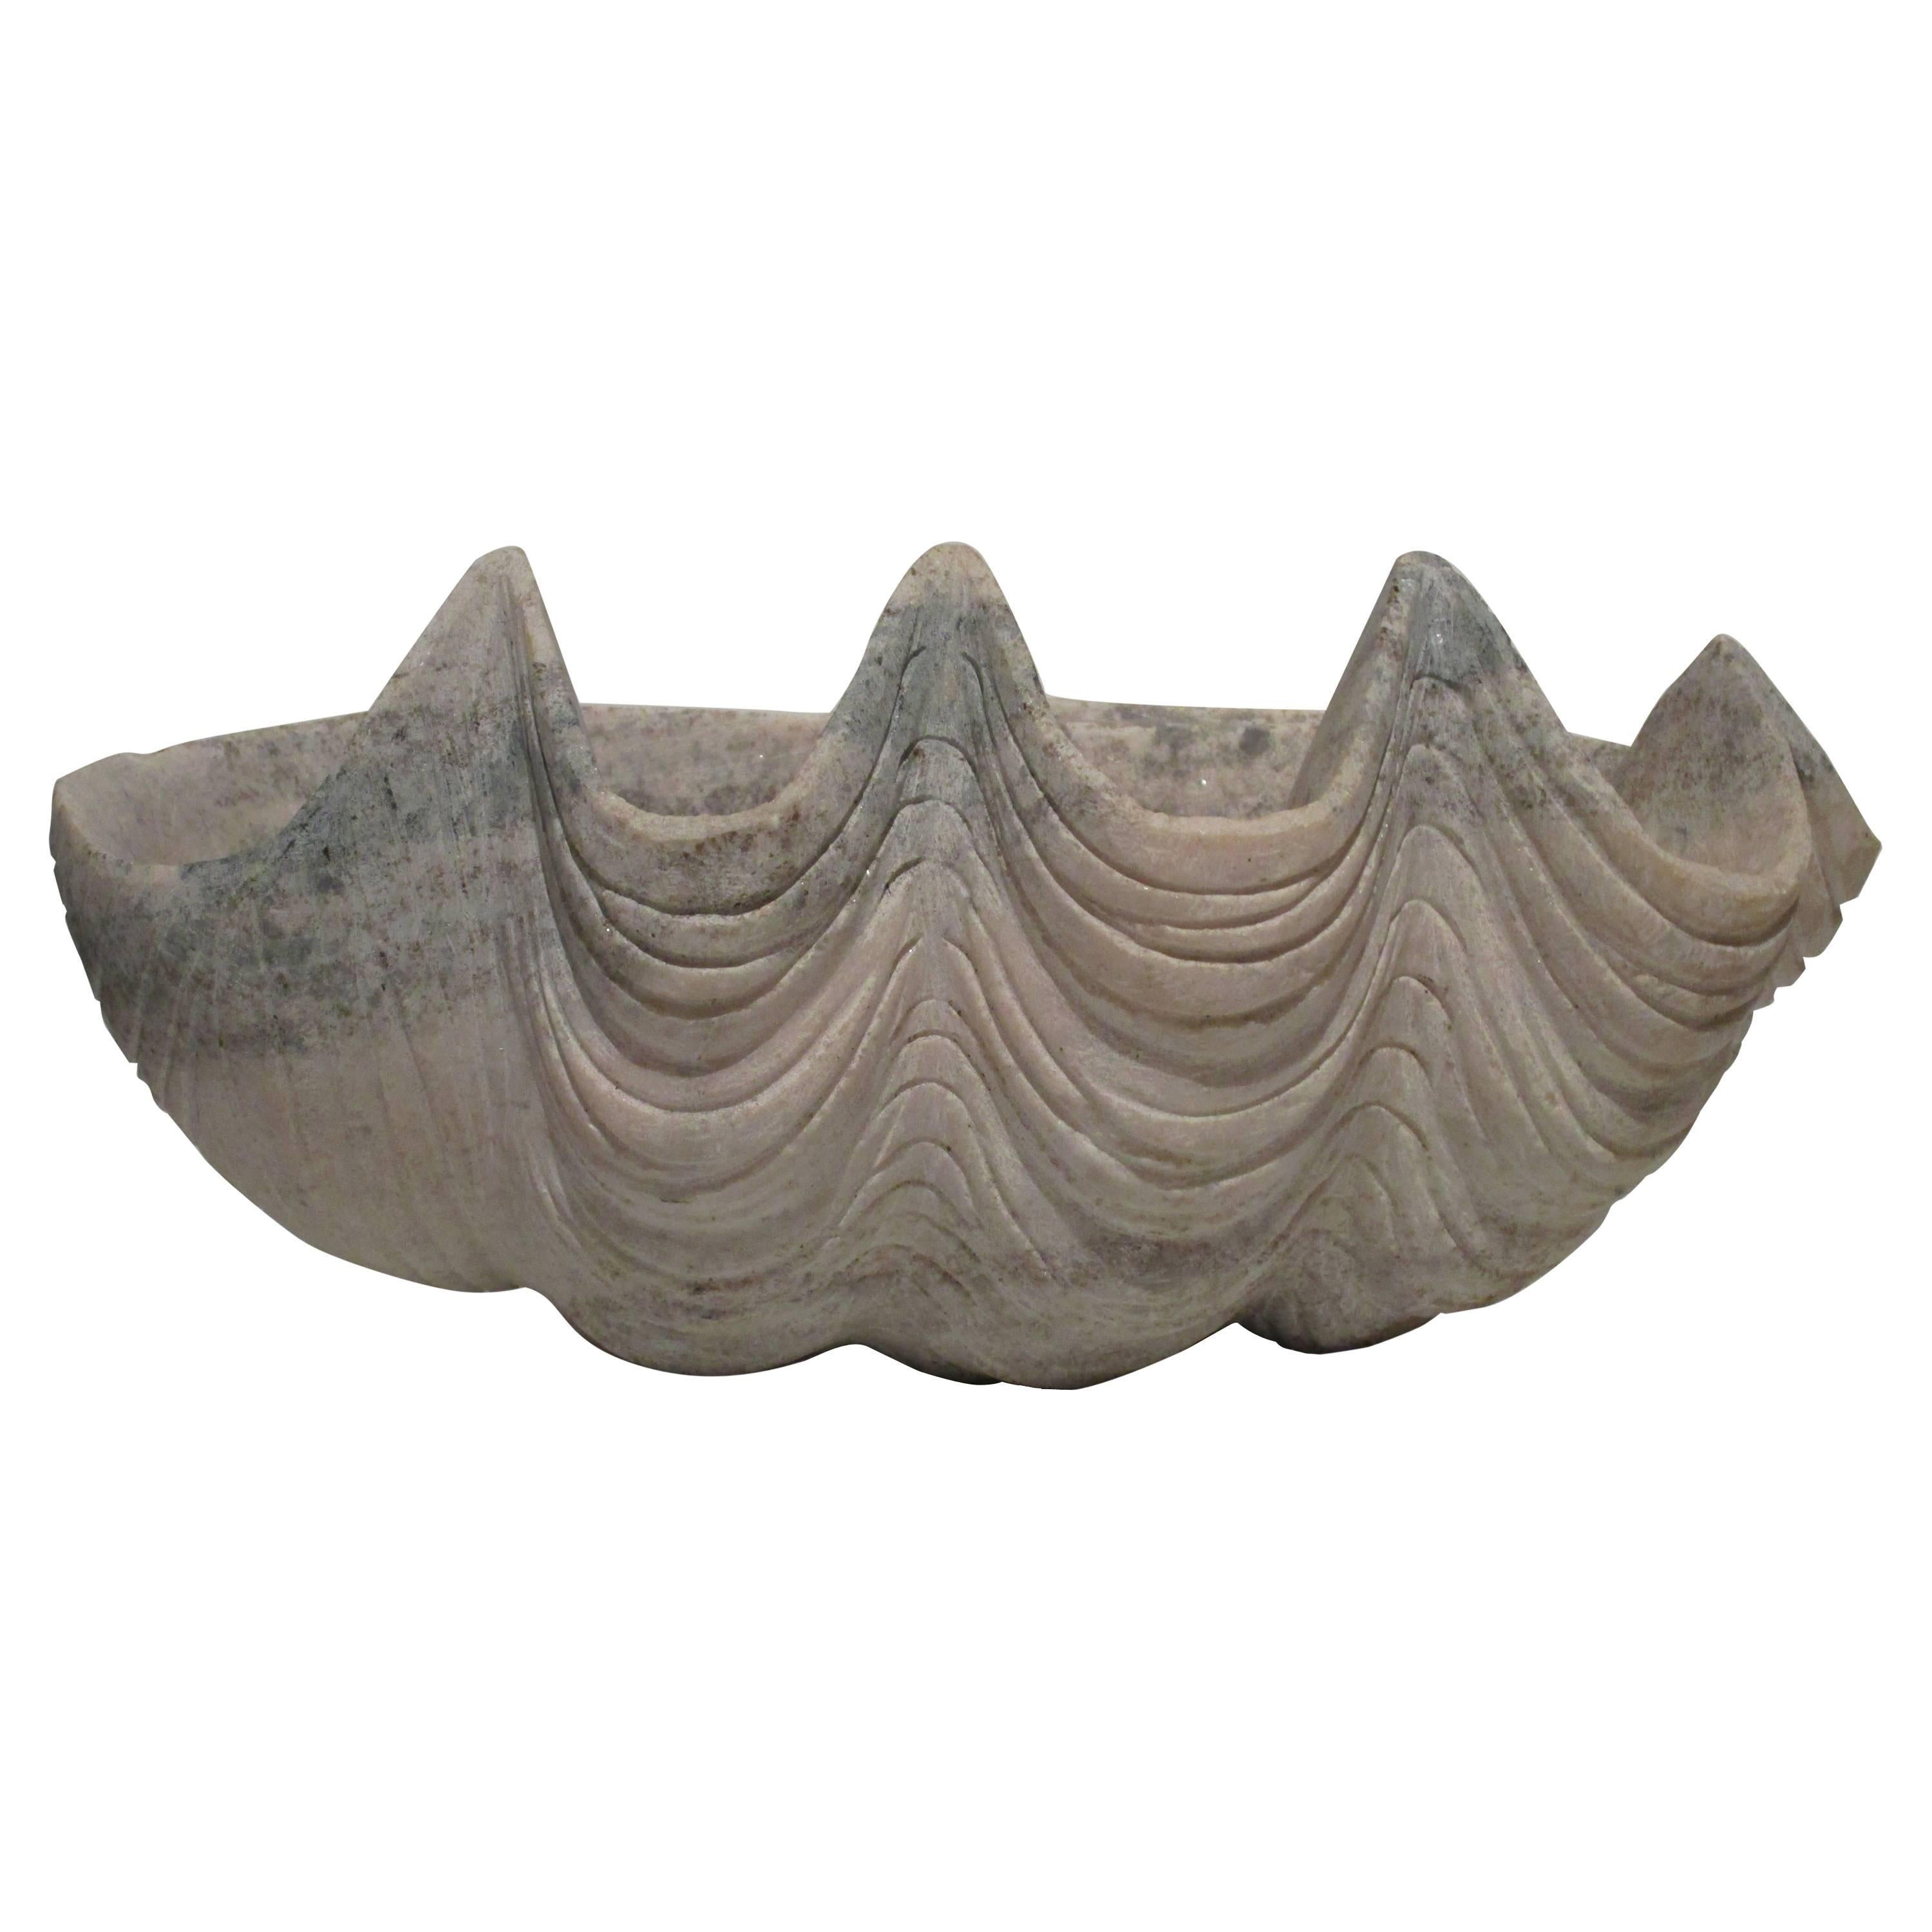 Large Carved Stone Clam Shell Sculpture For Sale